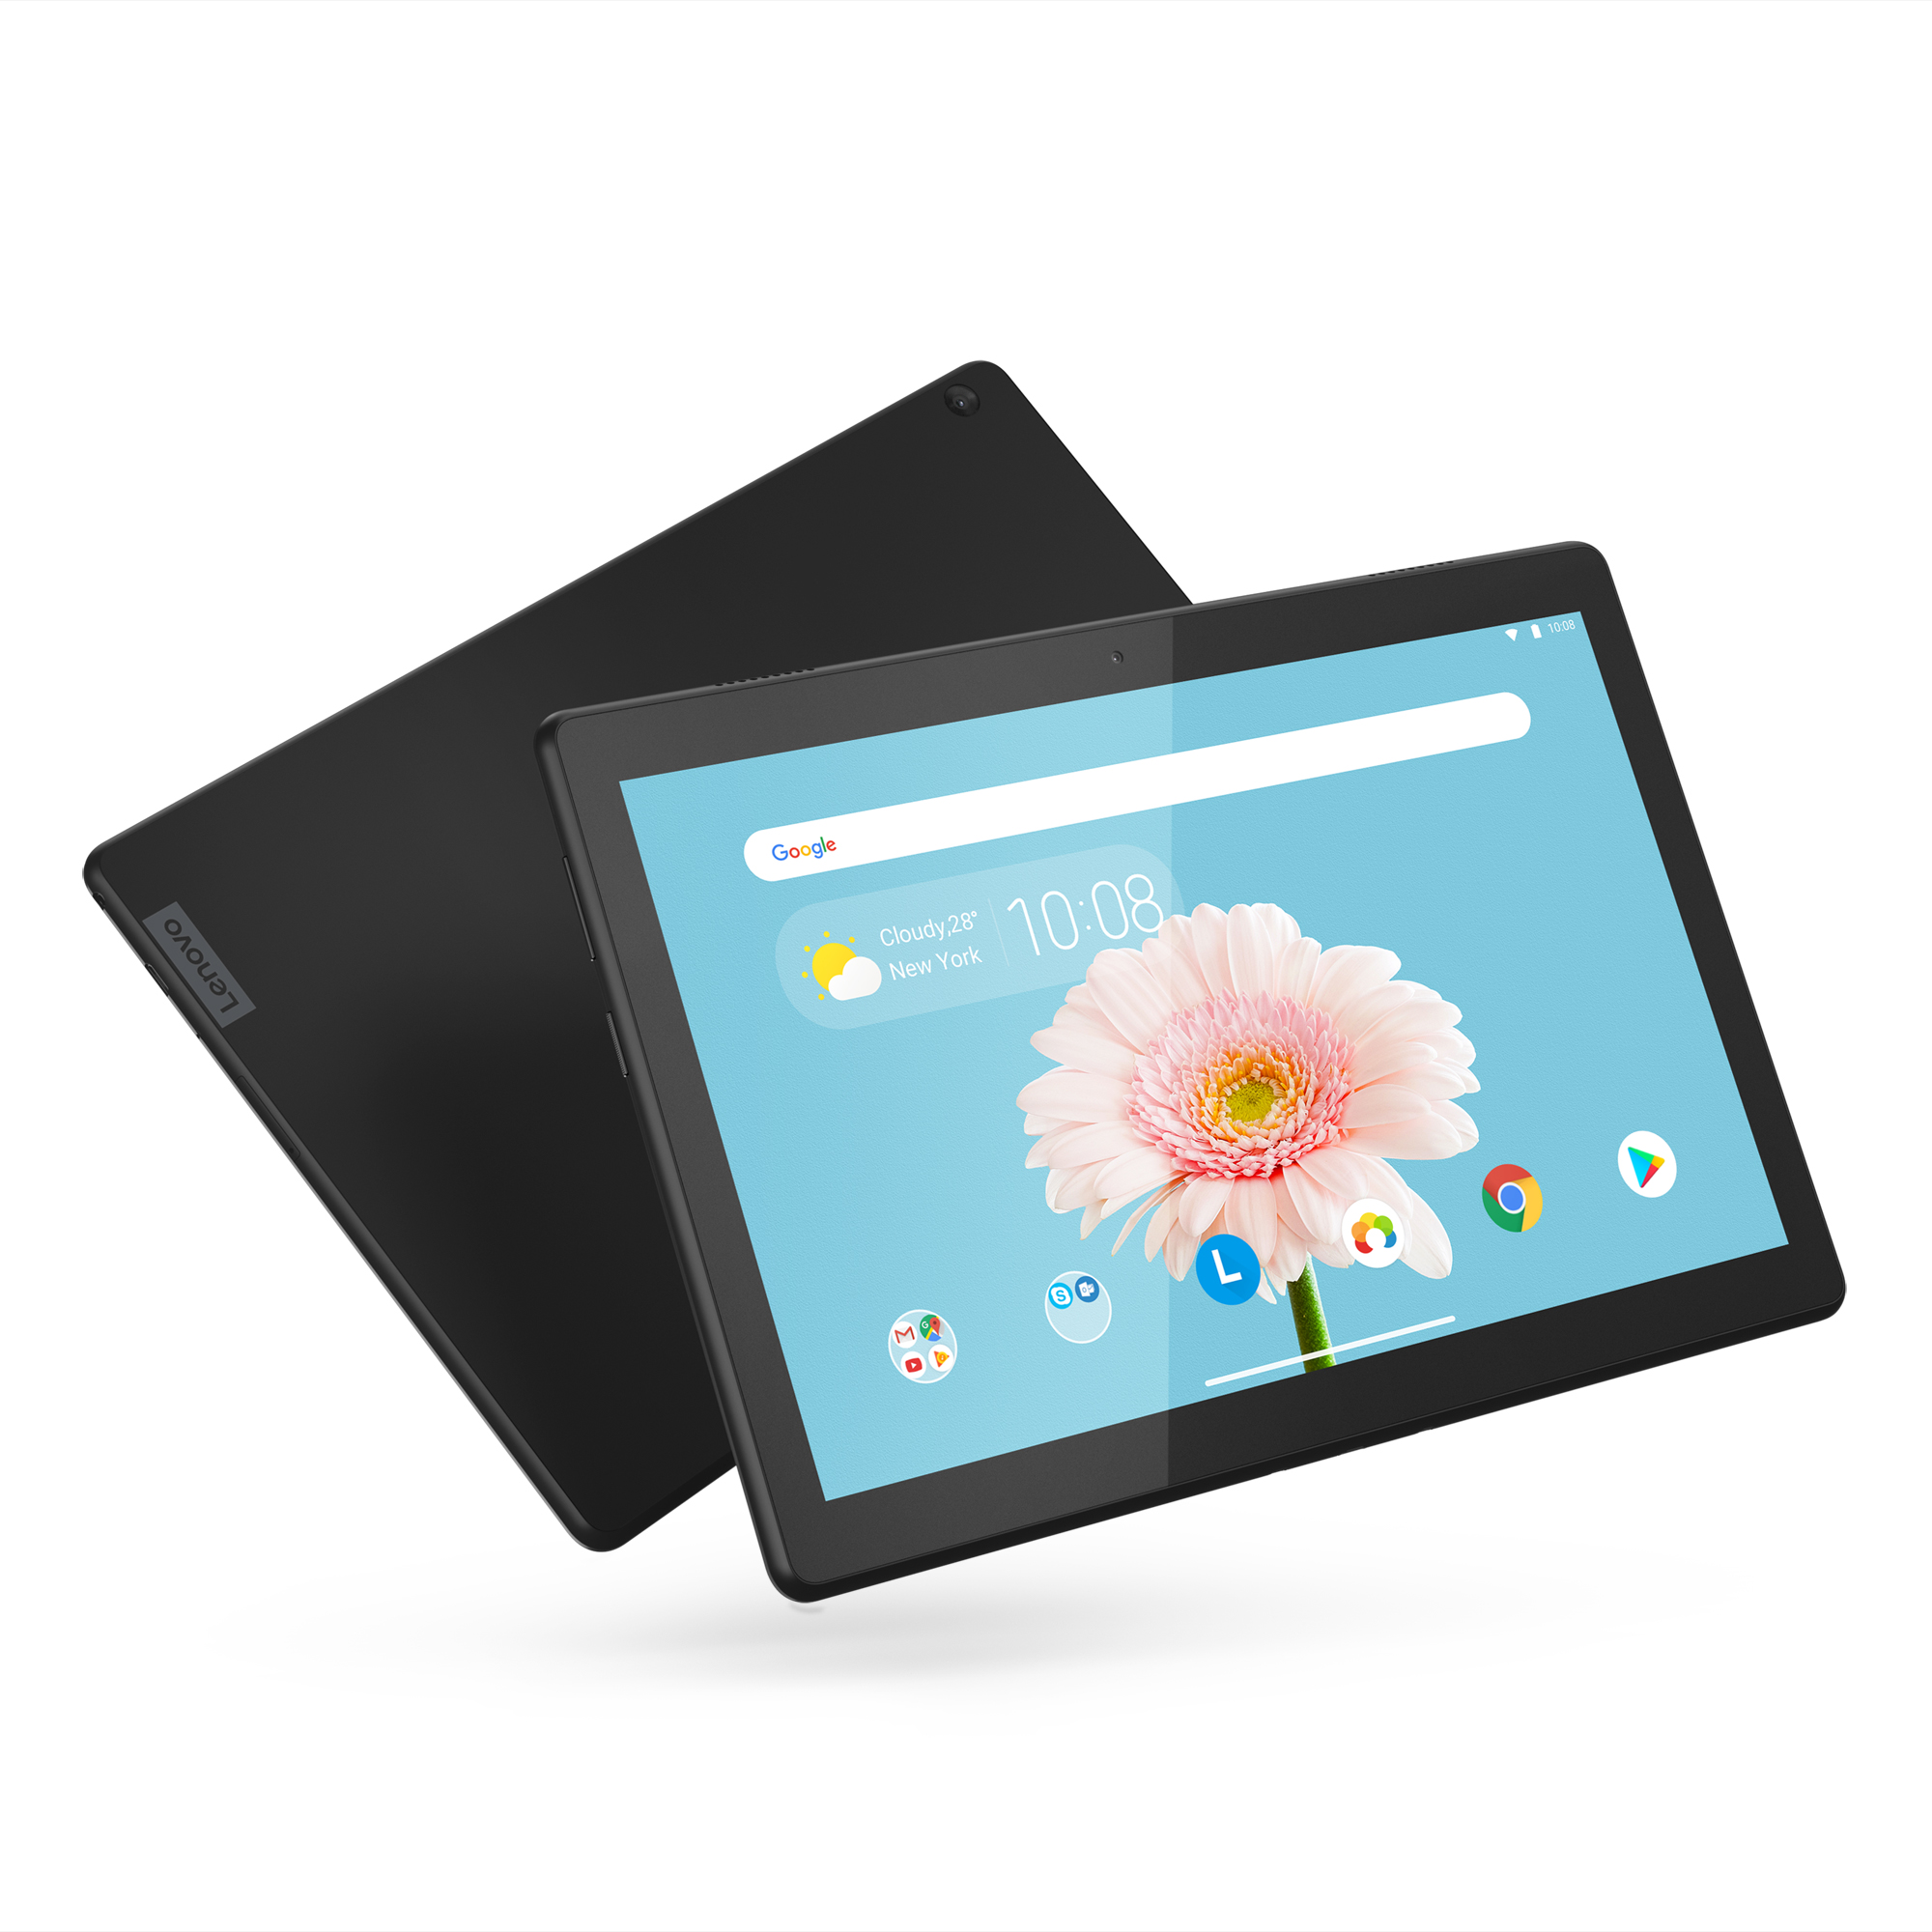 Lenovo Tab M10 10.1” (Android tablet) 32GB - image 1 of 9